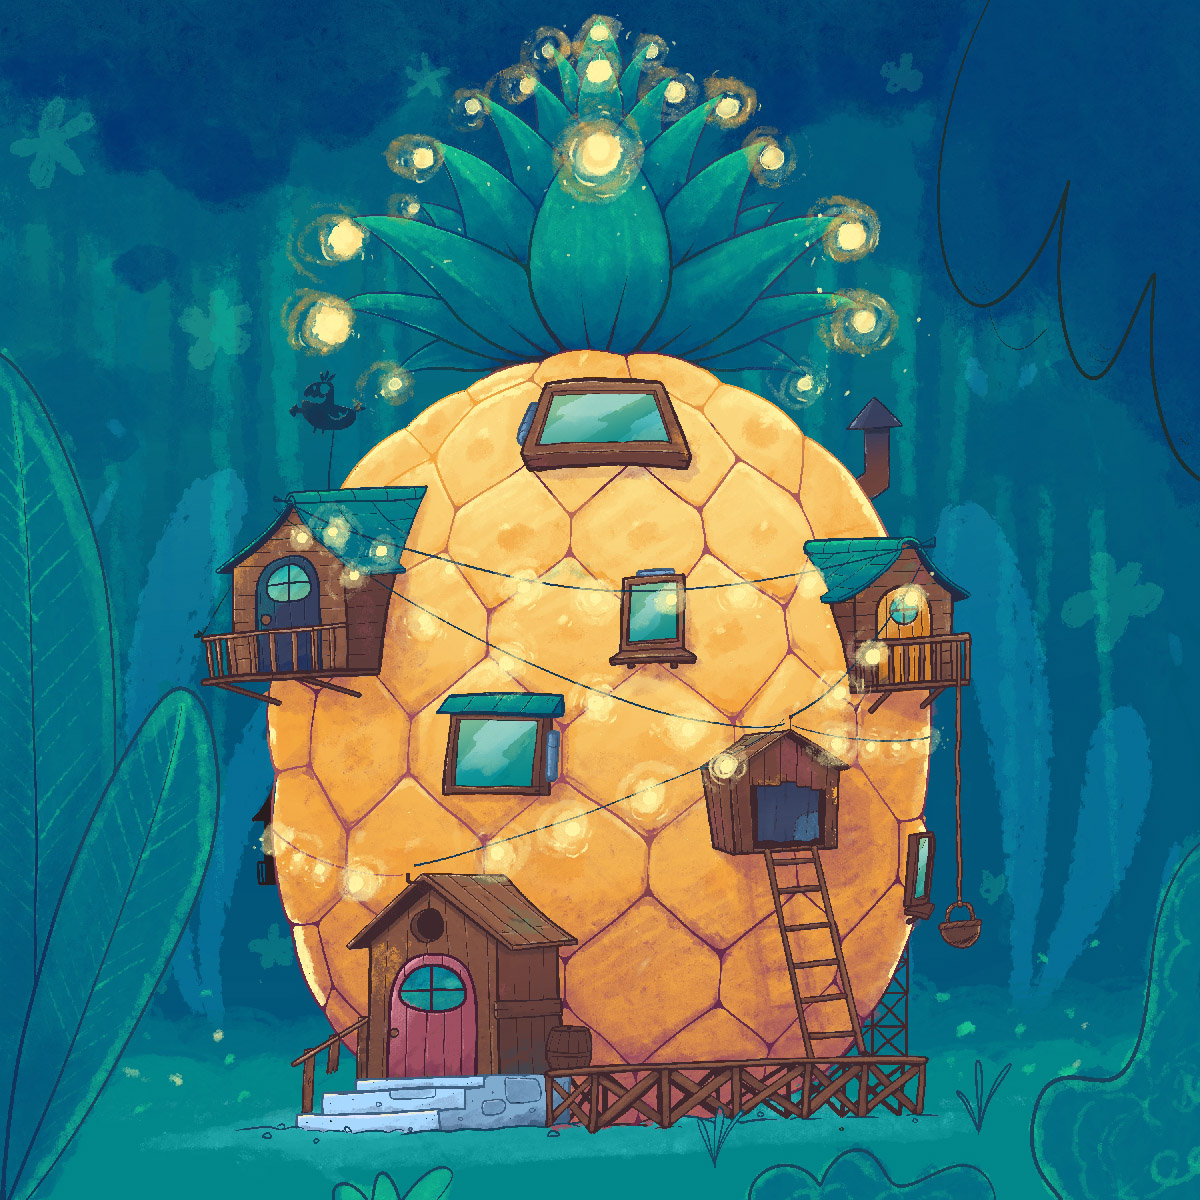 digital painting of a giant hut shaped hut being built by people.